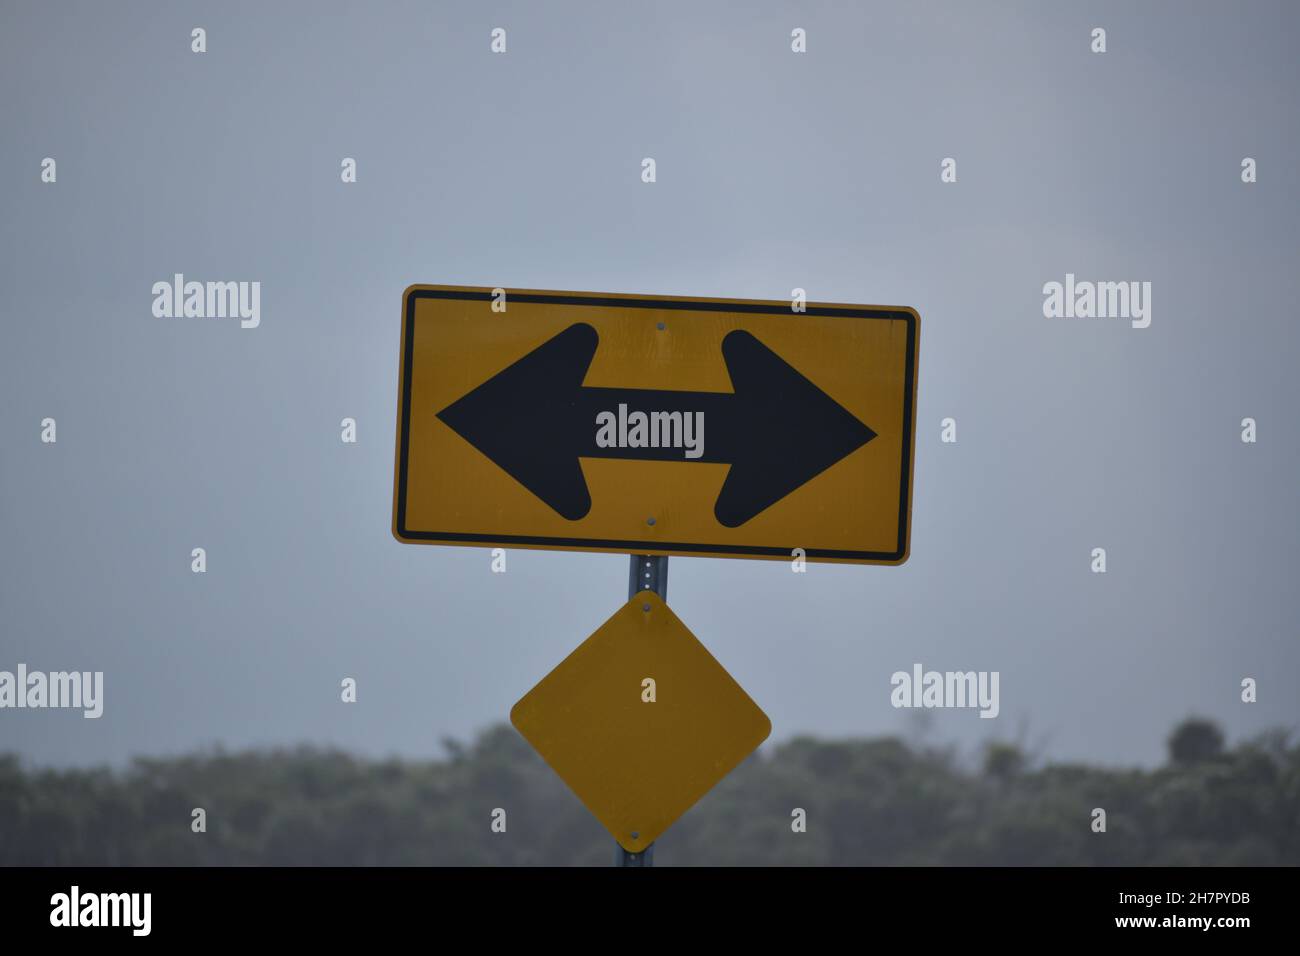 Black arrows on a yellow sign indicate traffic must turn. Stock Photo